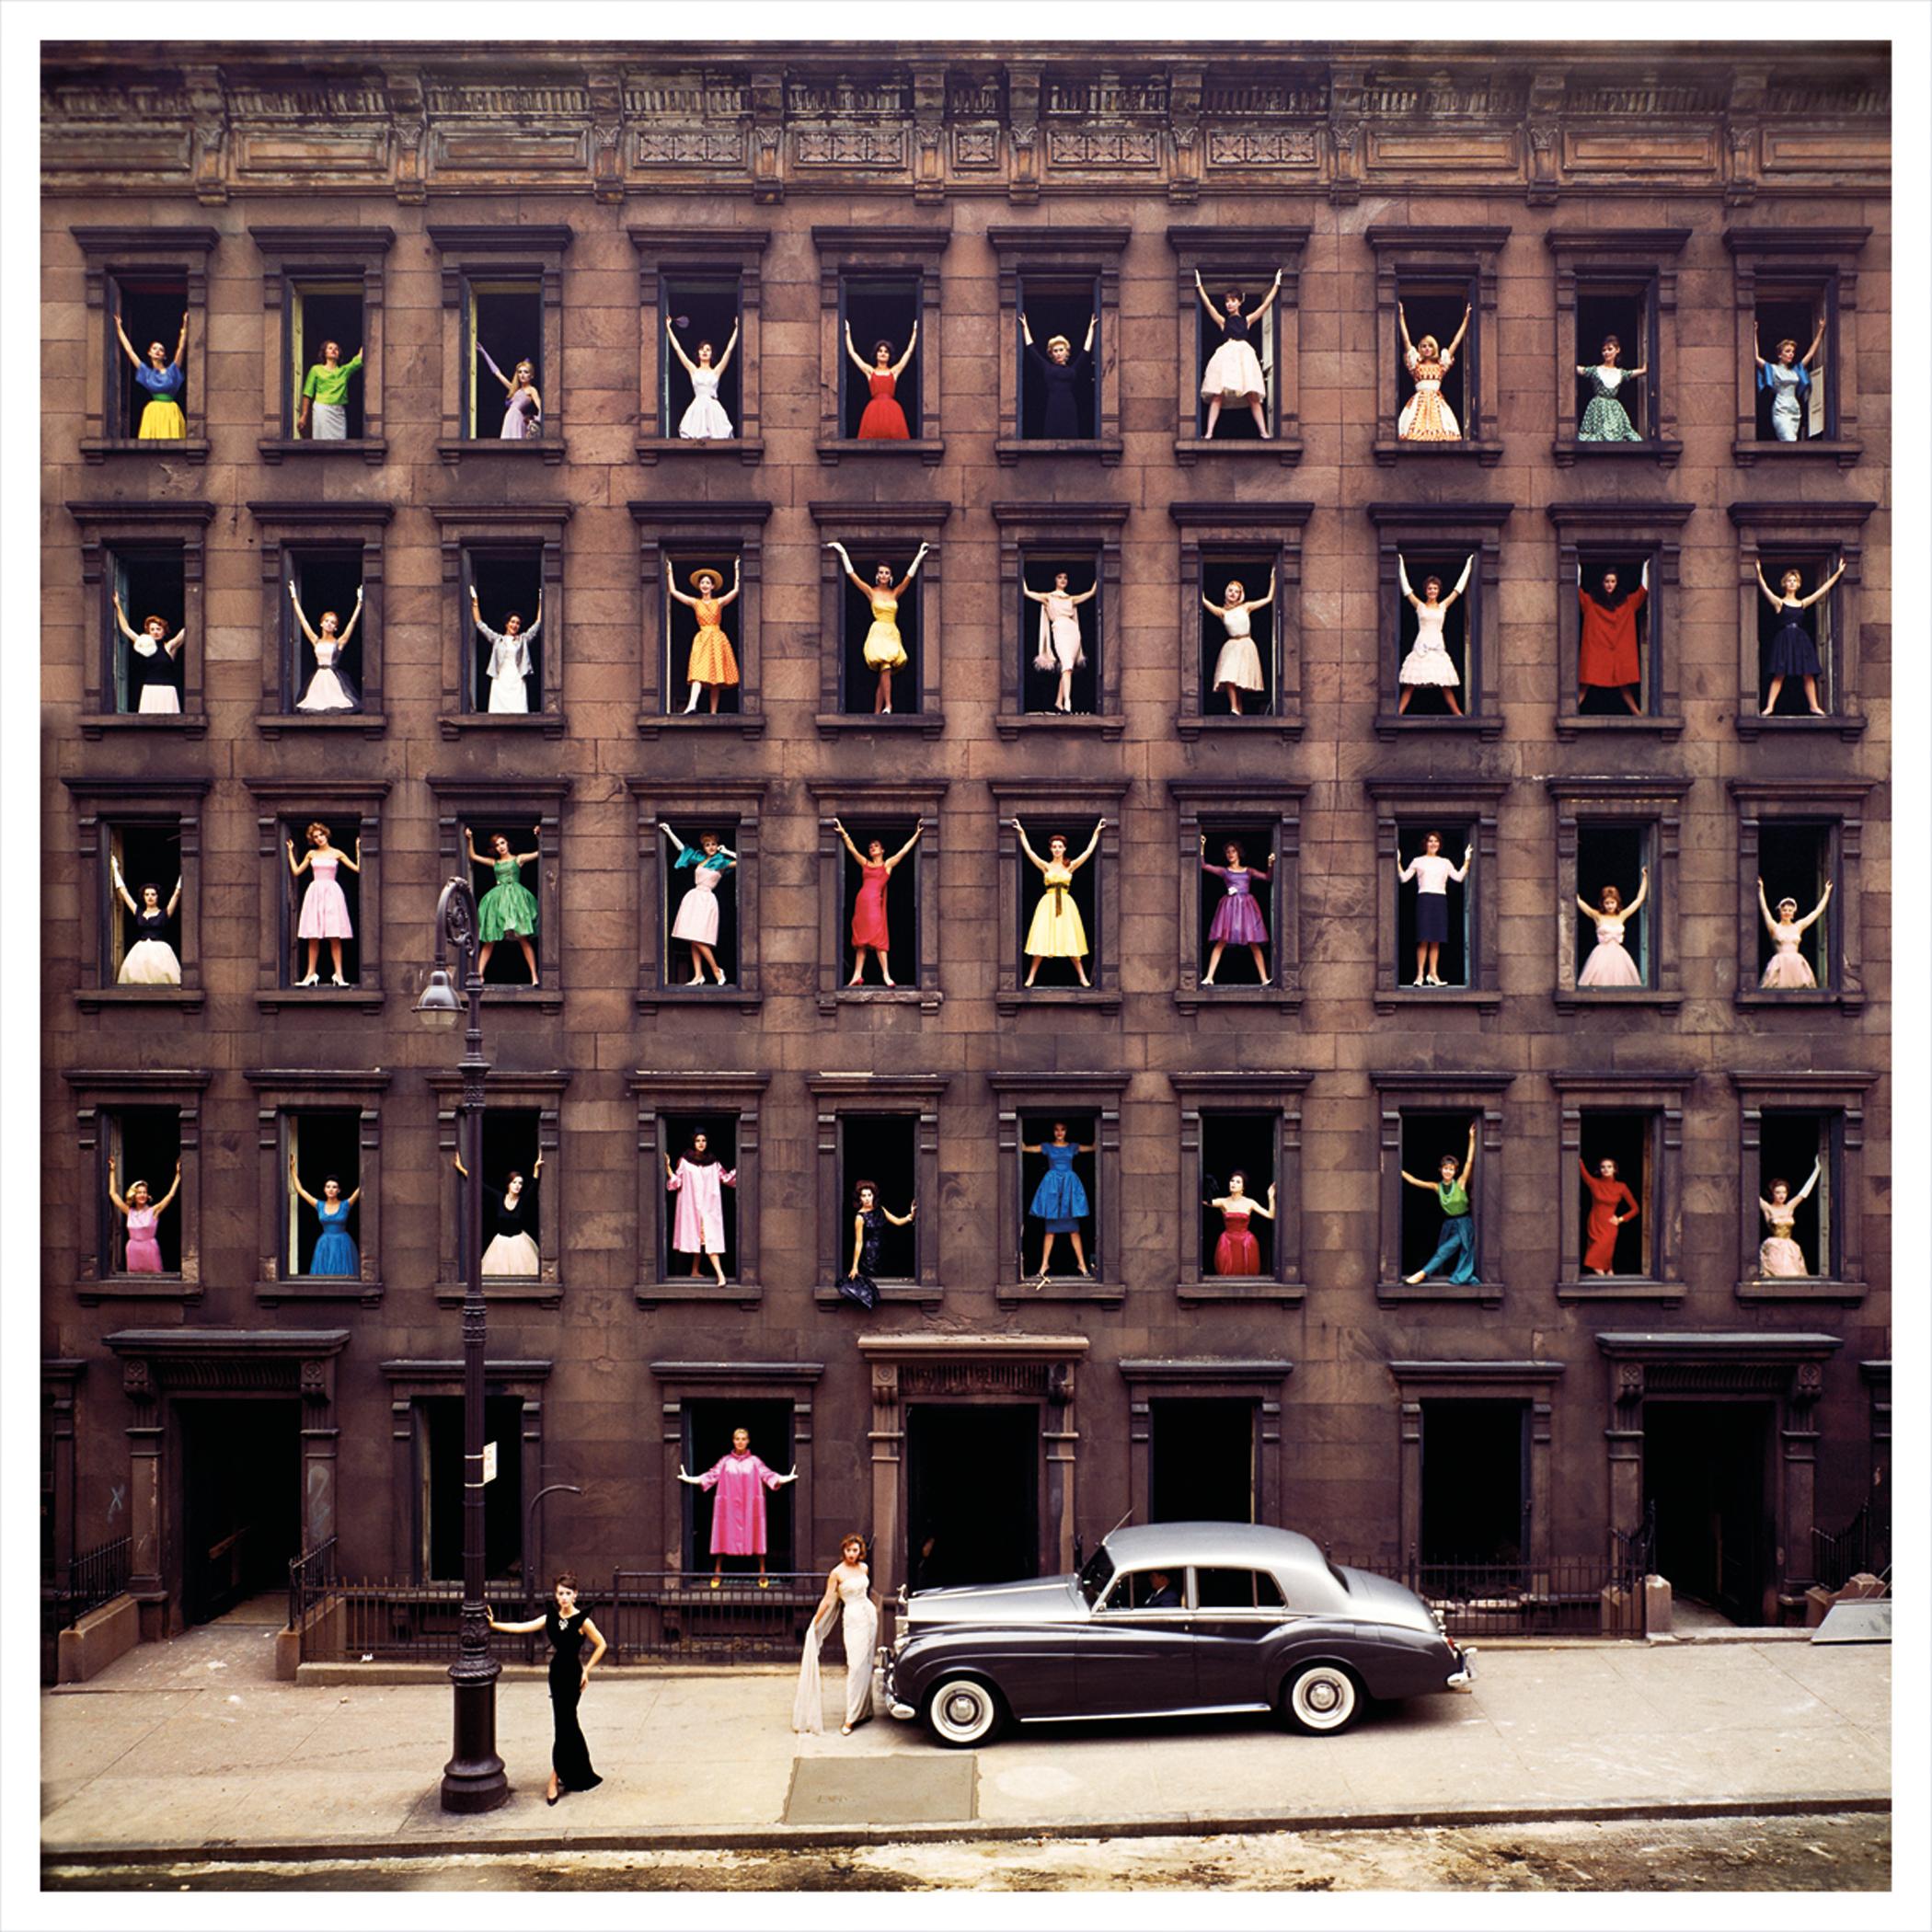 Ormond Gigli
Girls in the Window, 1960 (printed later)
Color coupler print
37 x 37 inches
edition of 45
Signed, numbered and dated by the artist
unframed

Ormond Gigli: The Visionary Behind the "Girls in the Windows"

Ormond Gigli is a highly